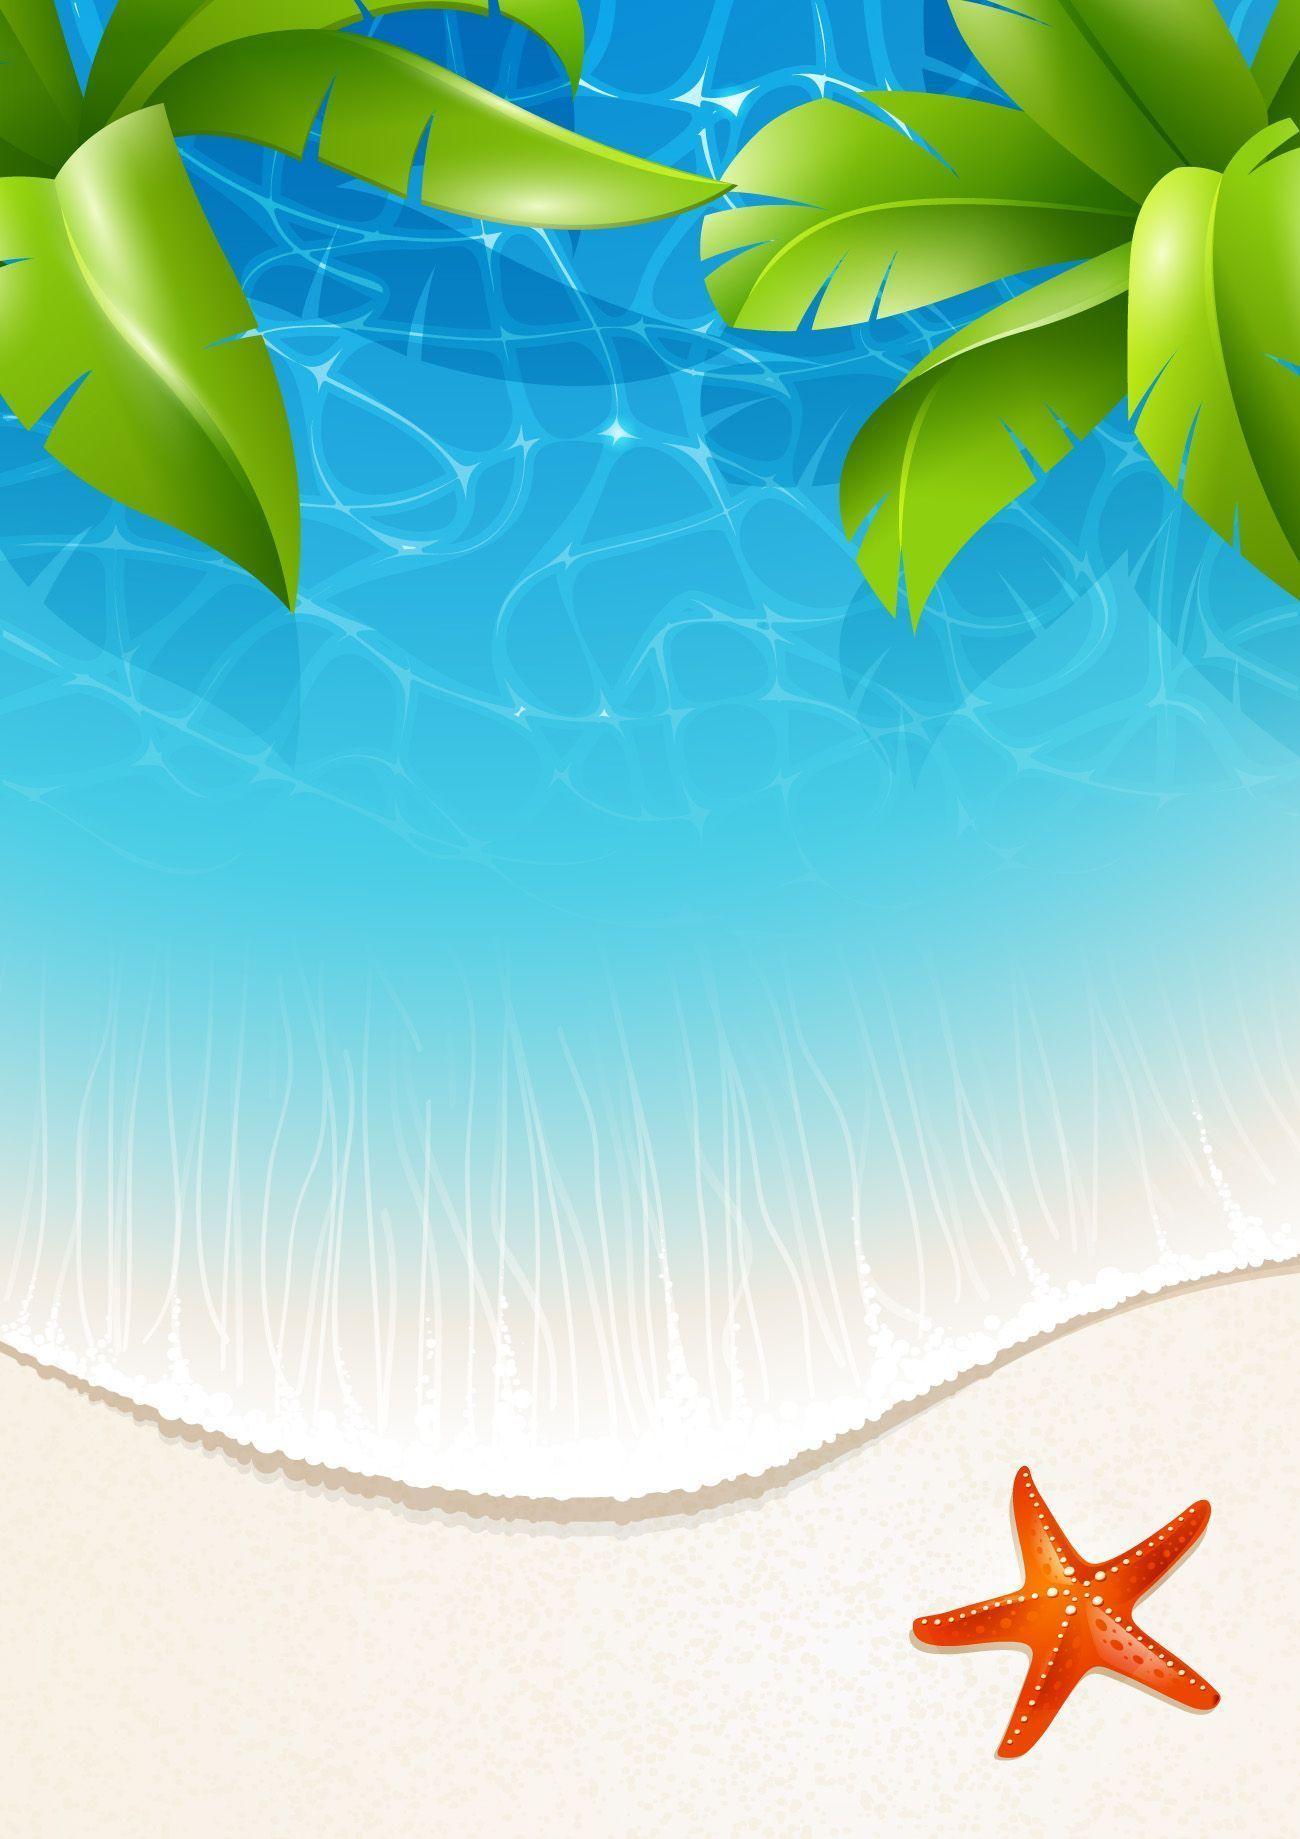 Tropical Backgrounds Image